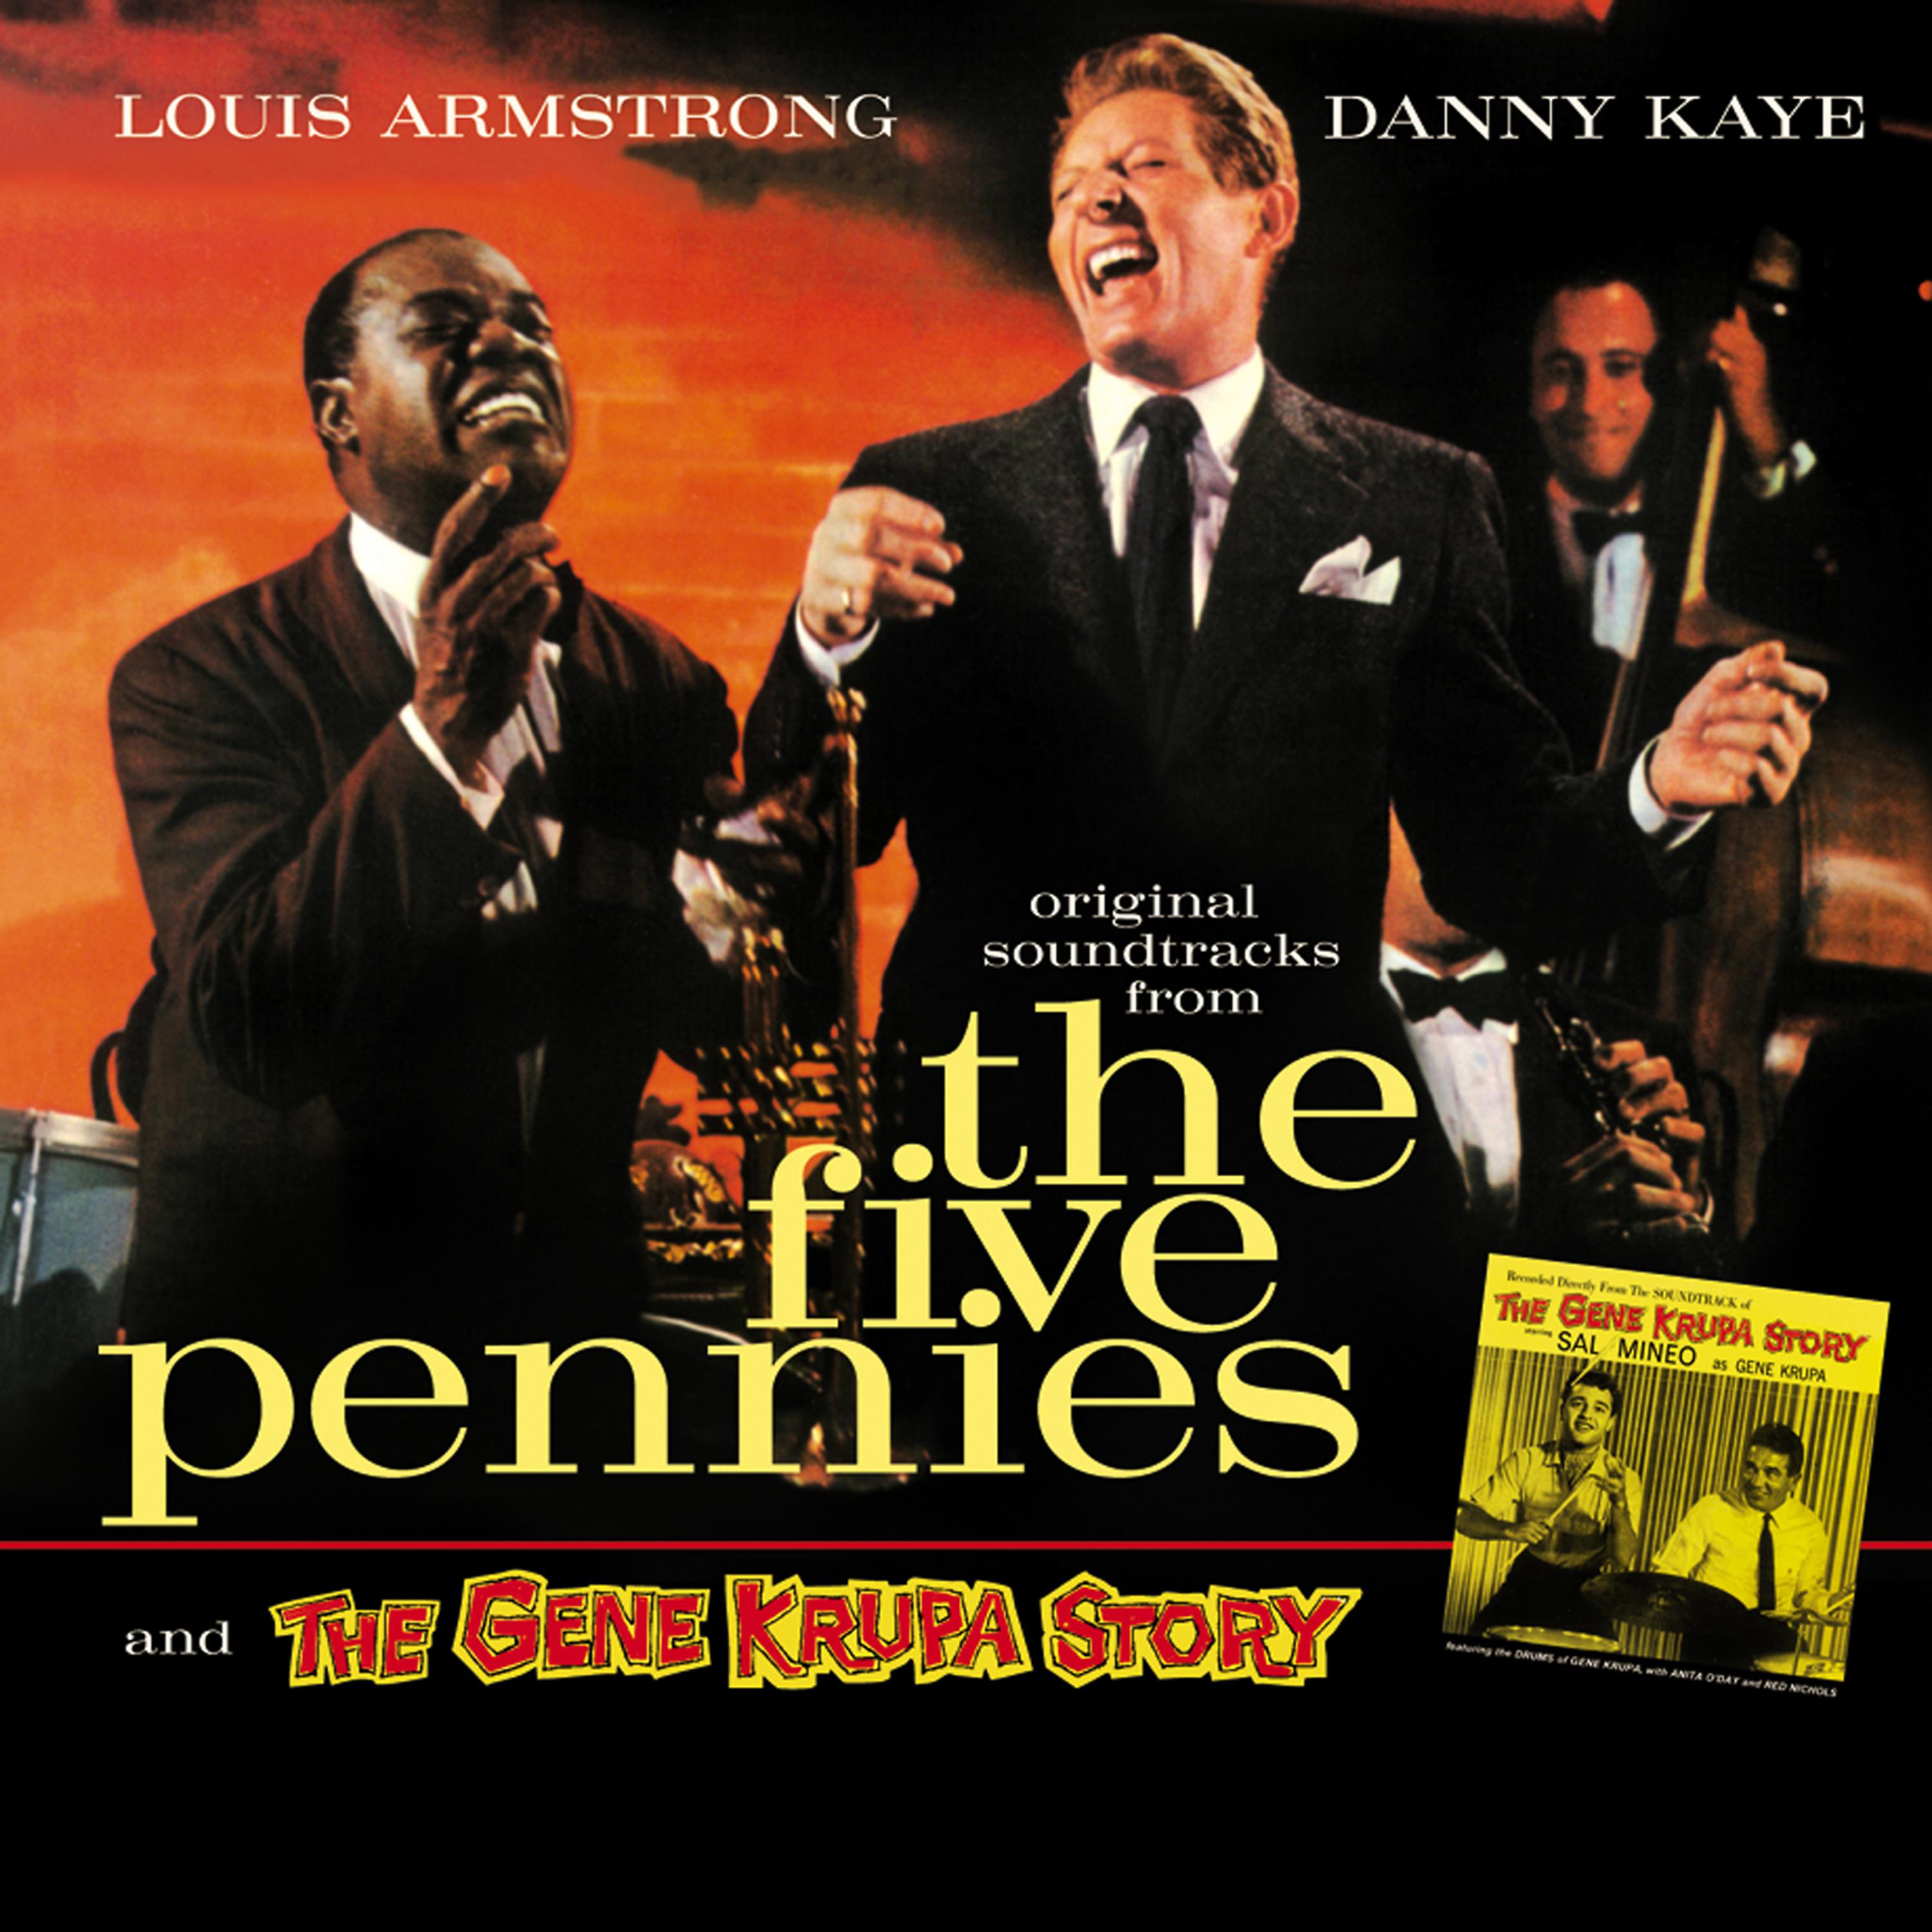 Постер альбома "The Five Pennies" & "The Gene Krupa Story" (Original Motion Picture Soundtrack)